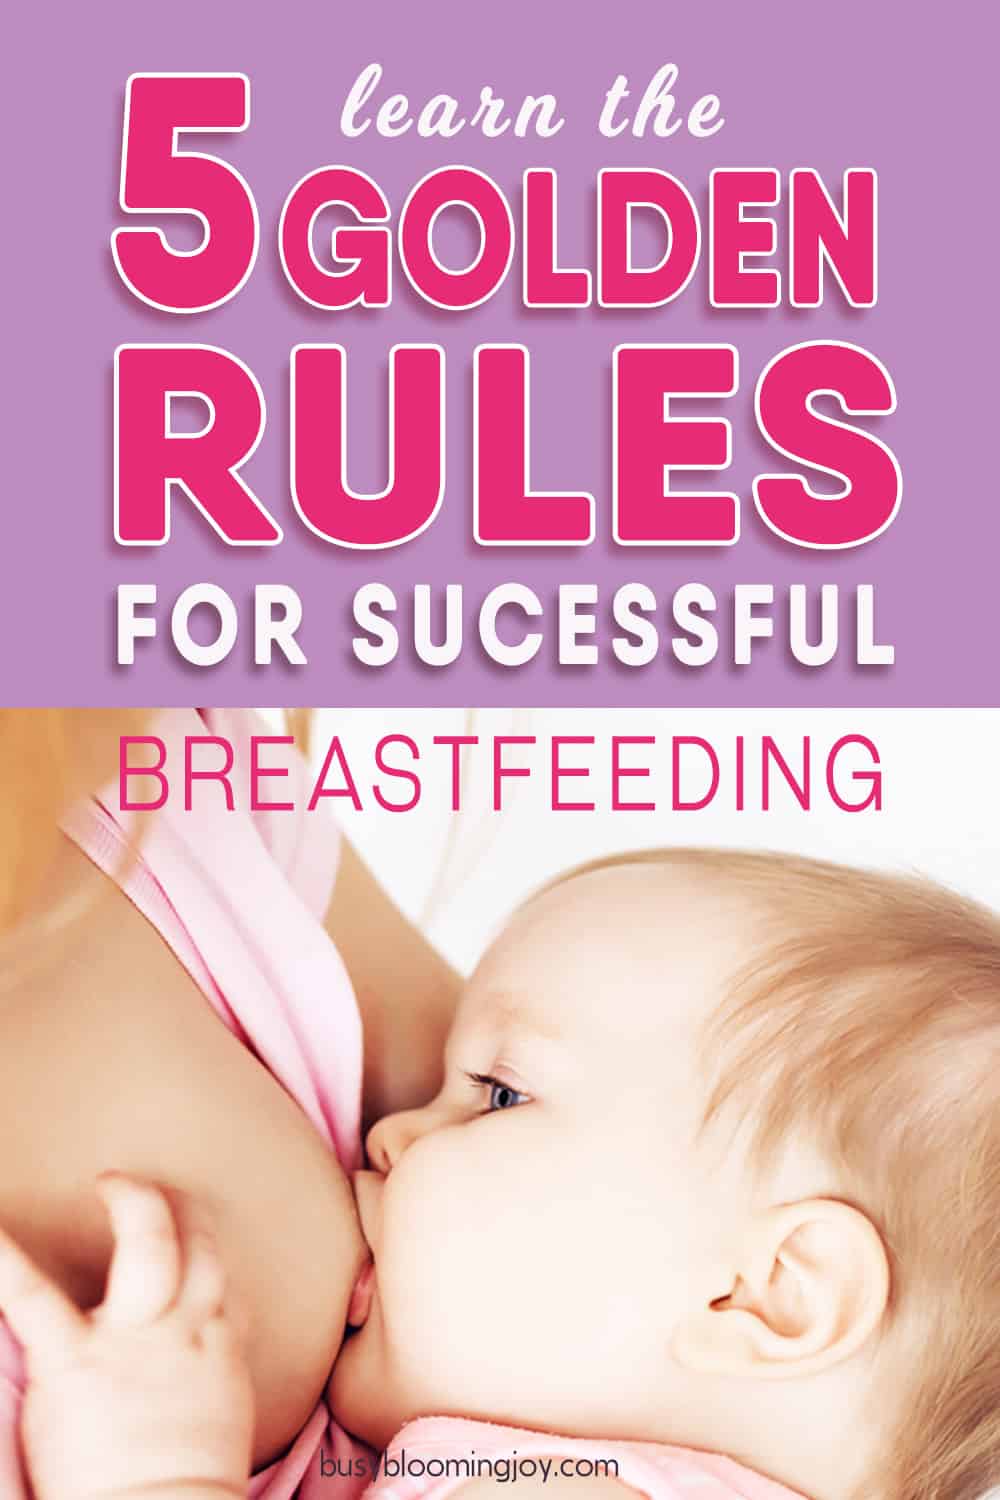 Newborn Breastfeeding: The 5 Golden Rules For Success From The Start